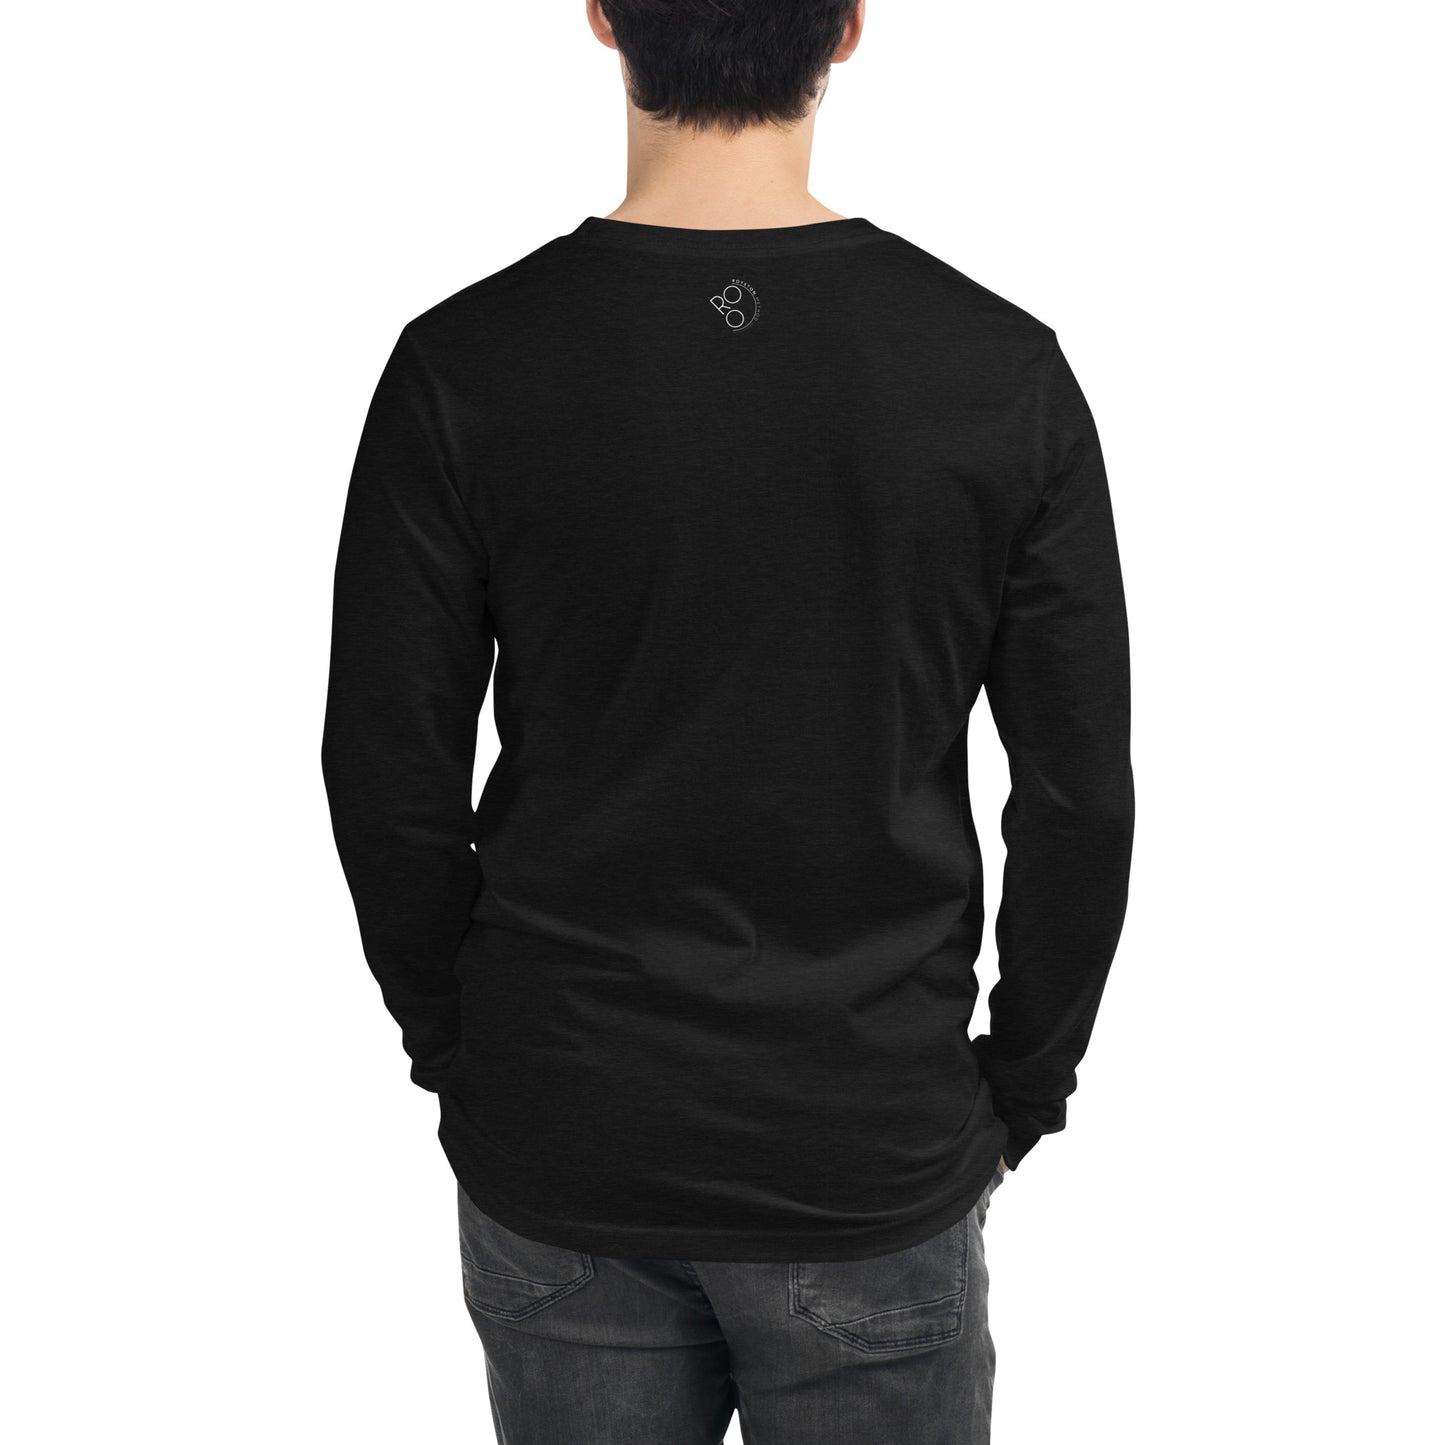 Fittest Over 50 Men's Long Sleeve Tee